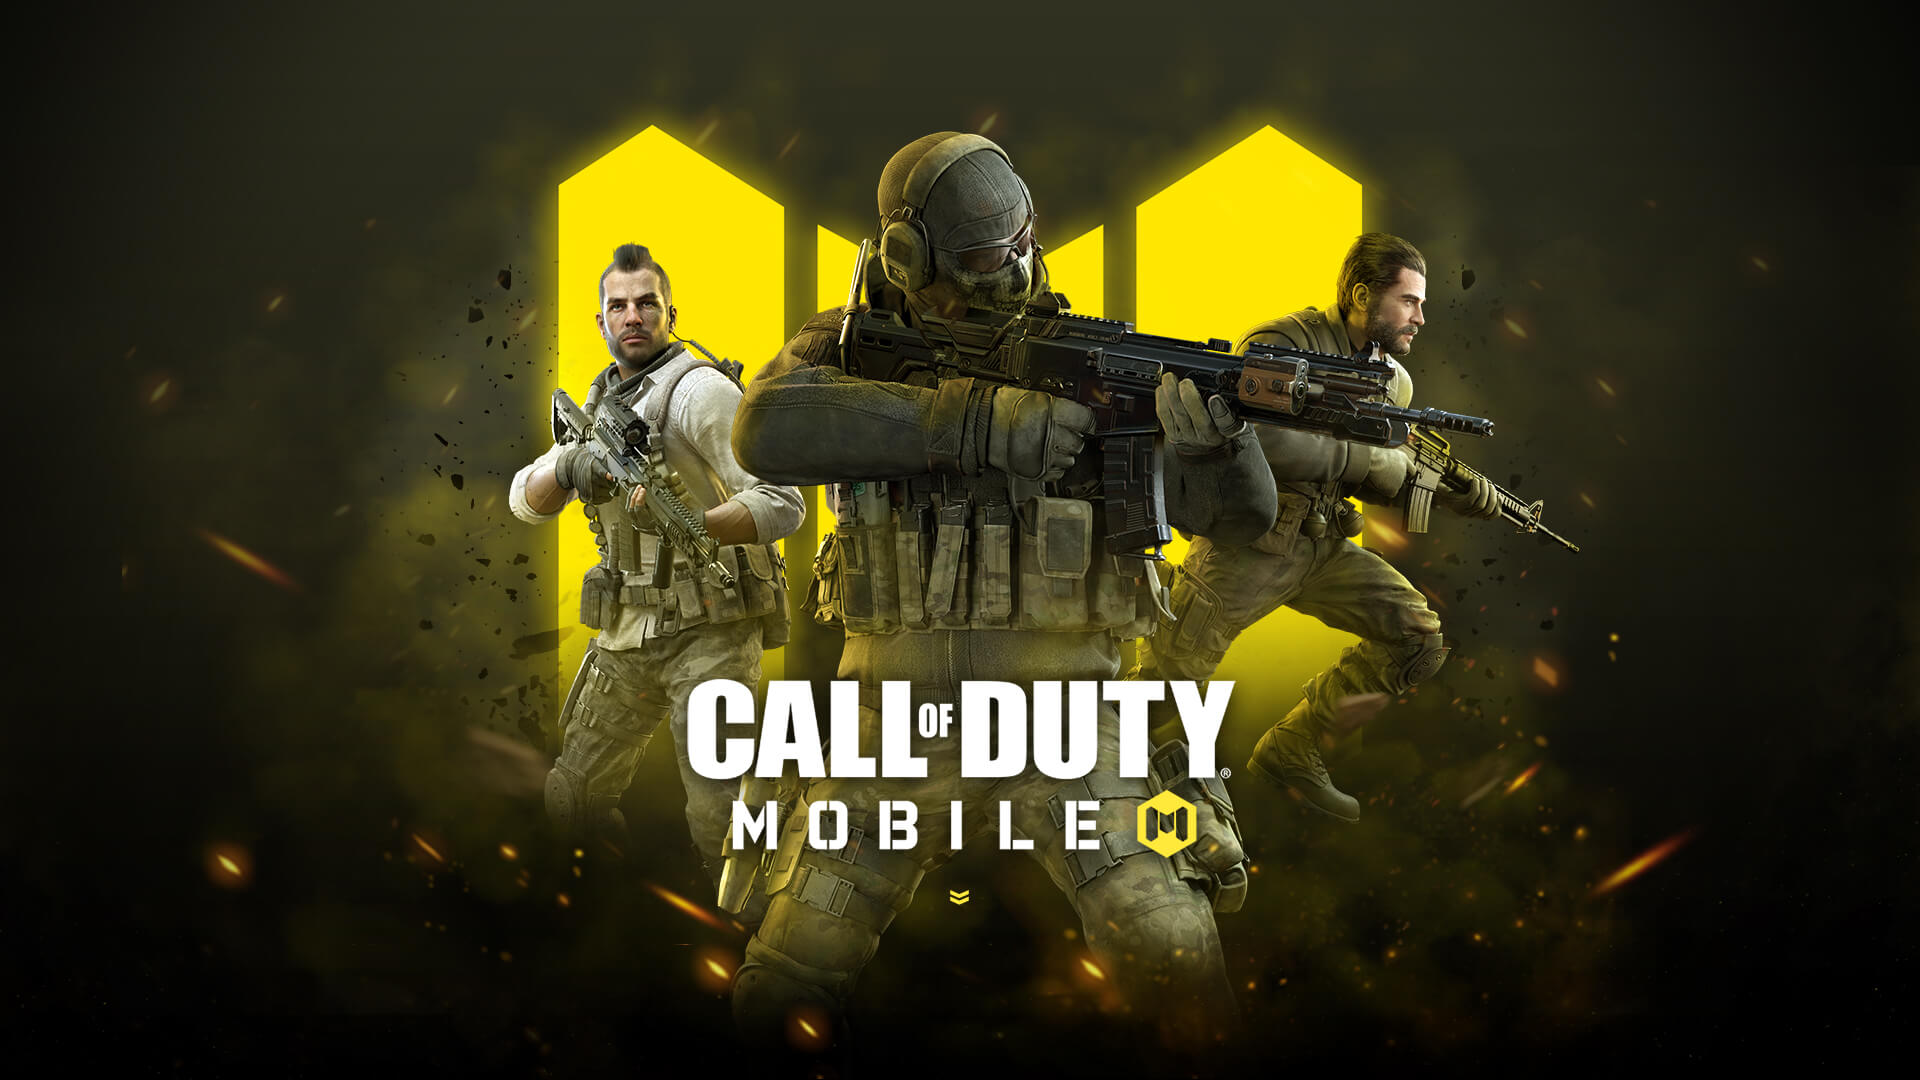 Codm Call of Duty Mobile Redeem Codes 